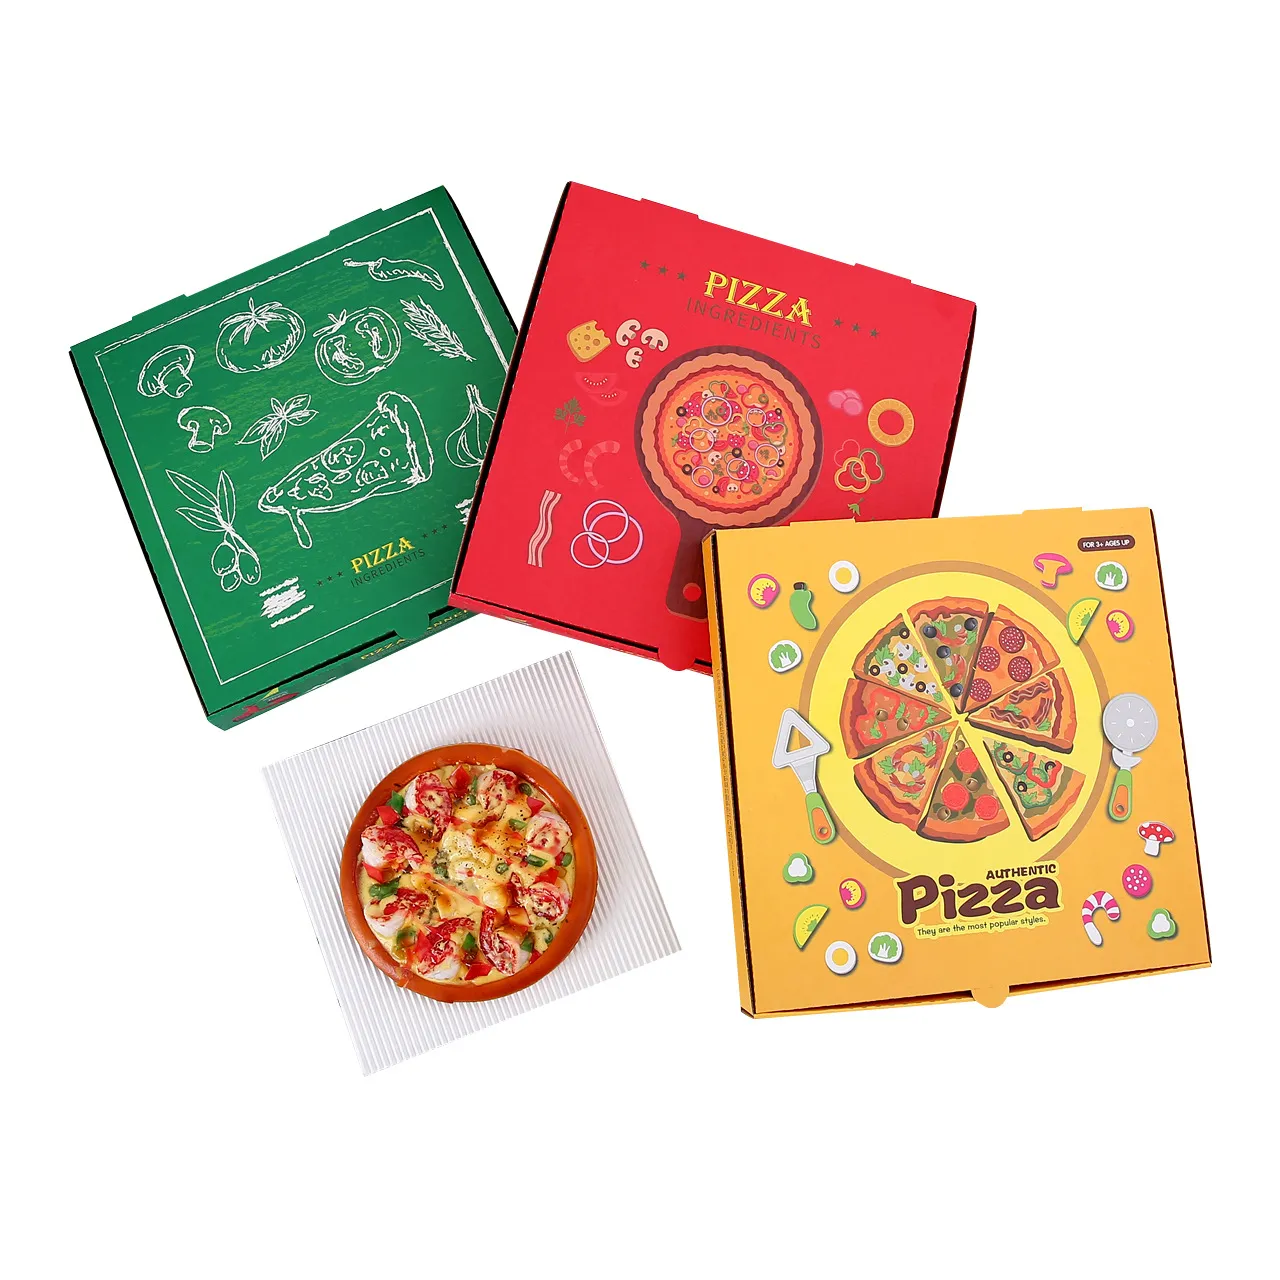 Custom 9 10 12 16 18 20 24 inch pizza boxes with logo custom printed pizza box container pizza box